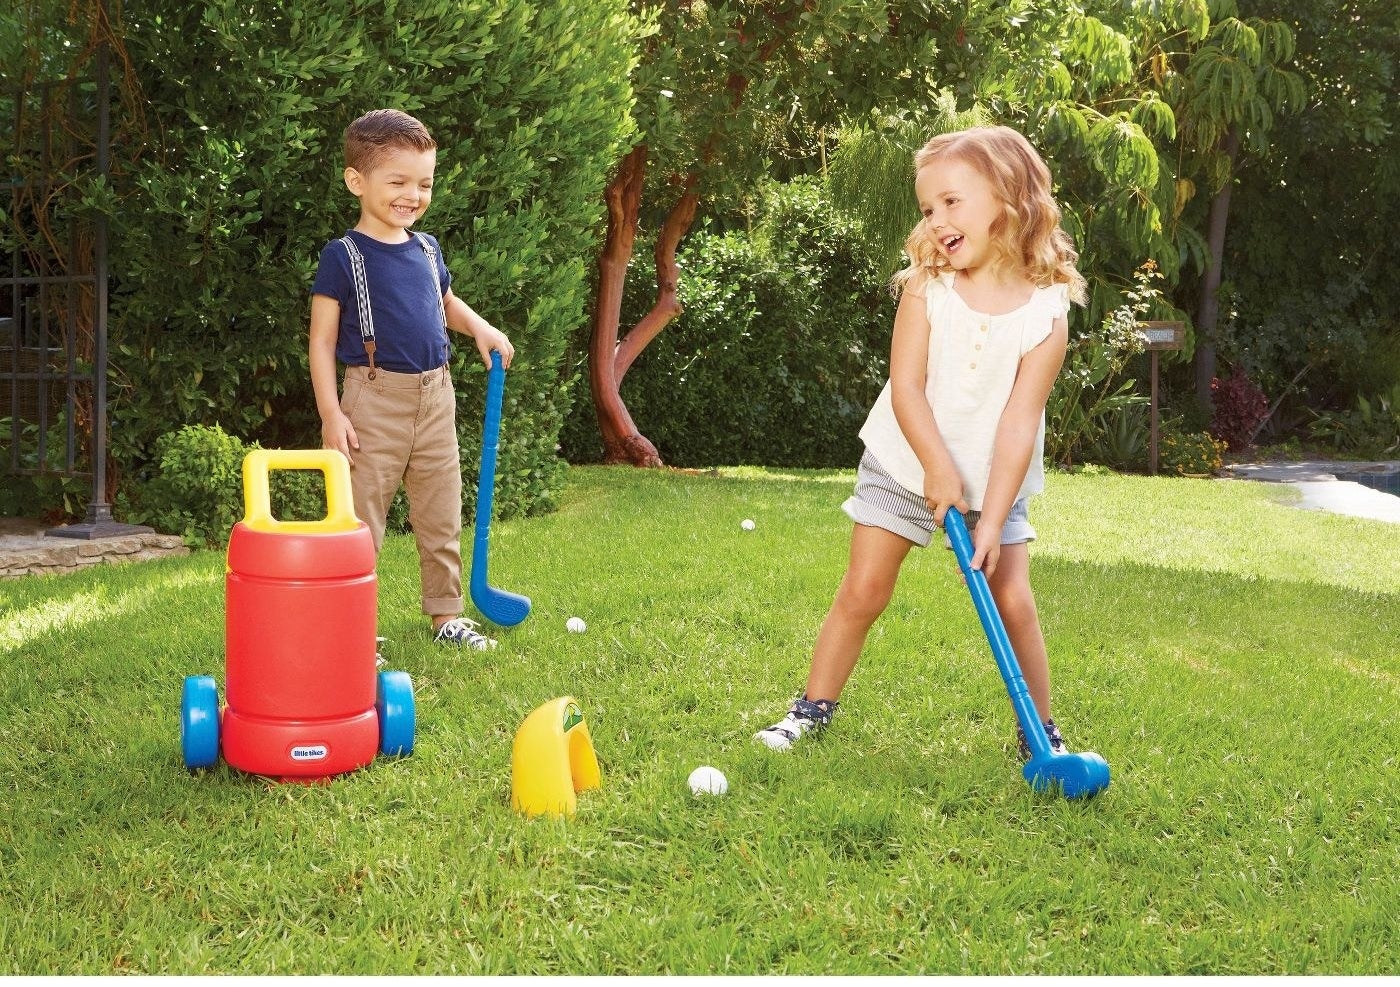 Kids playing with Little Tikes golf set